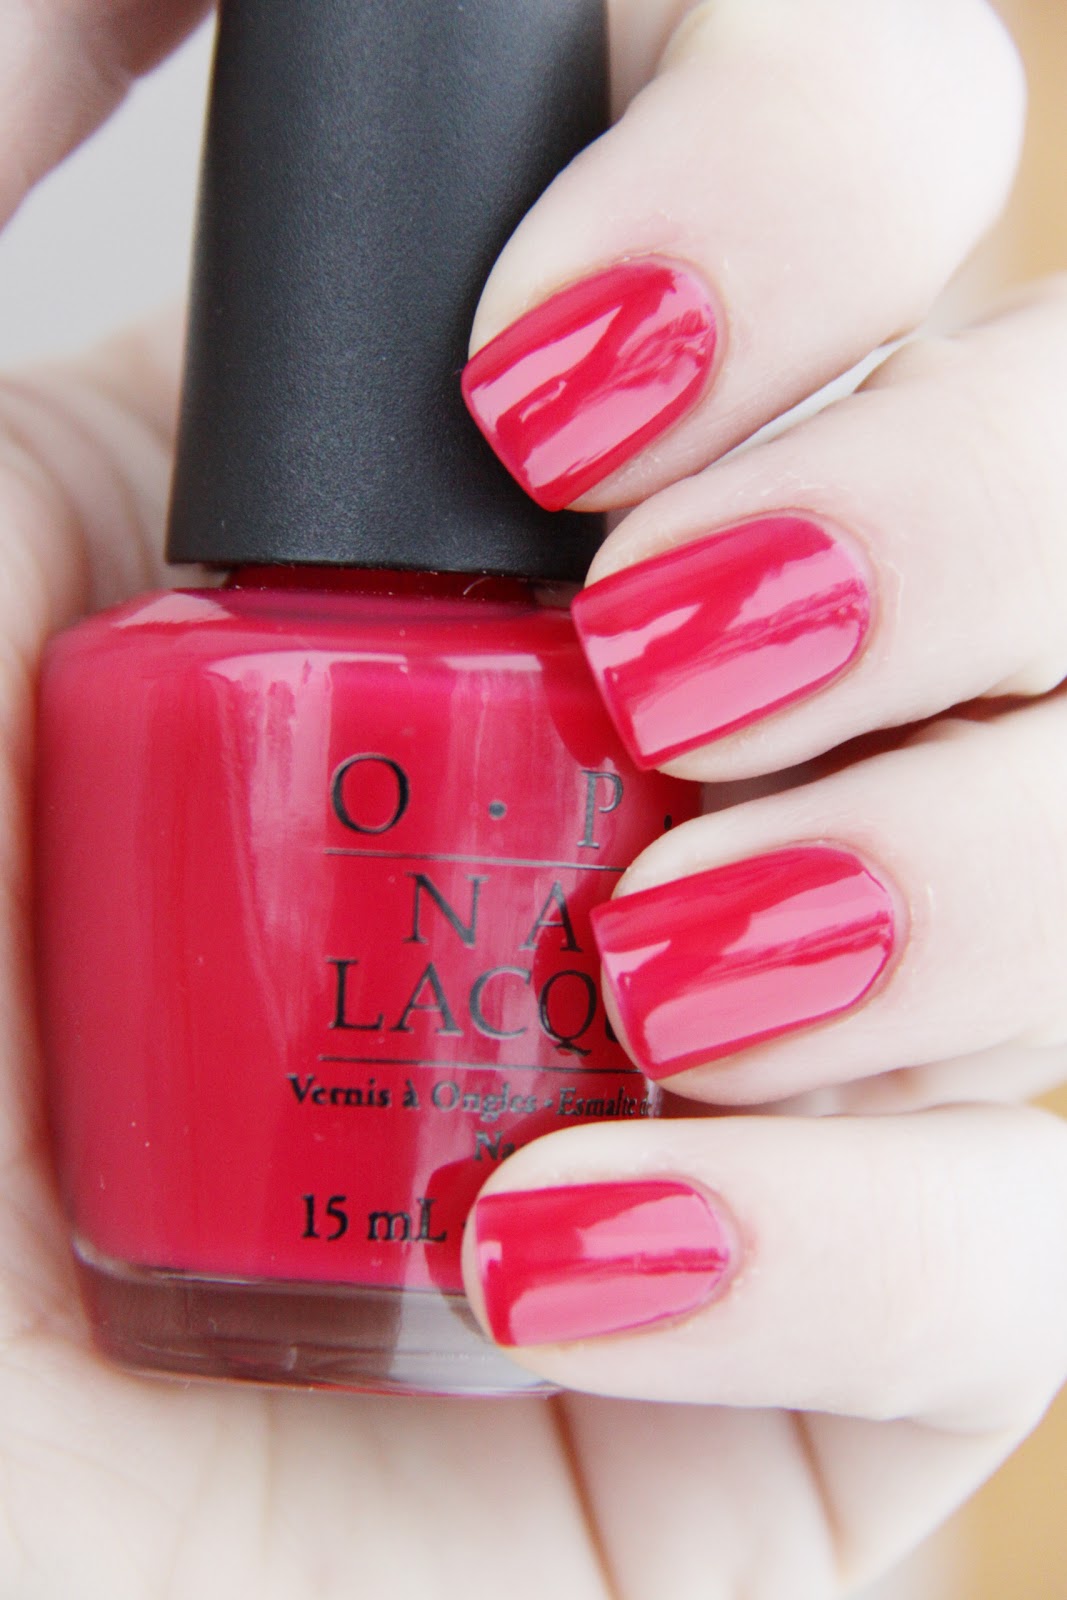 OPI+Too+hot+pink+to+hold+%25C3%25A9m.JPG